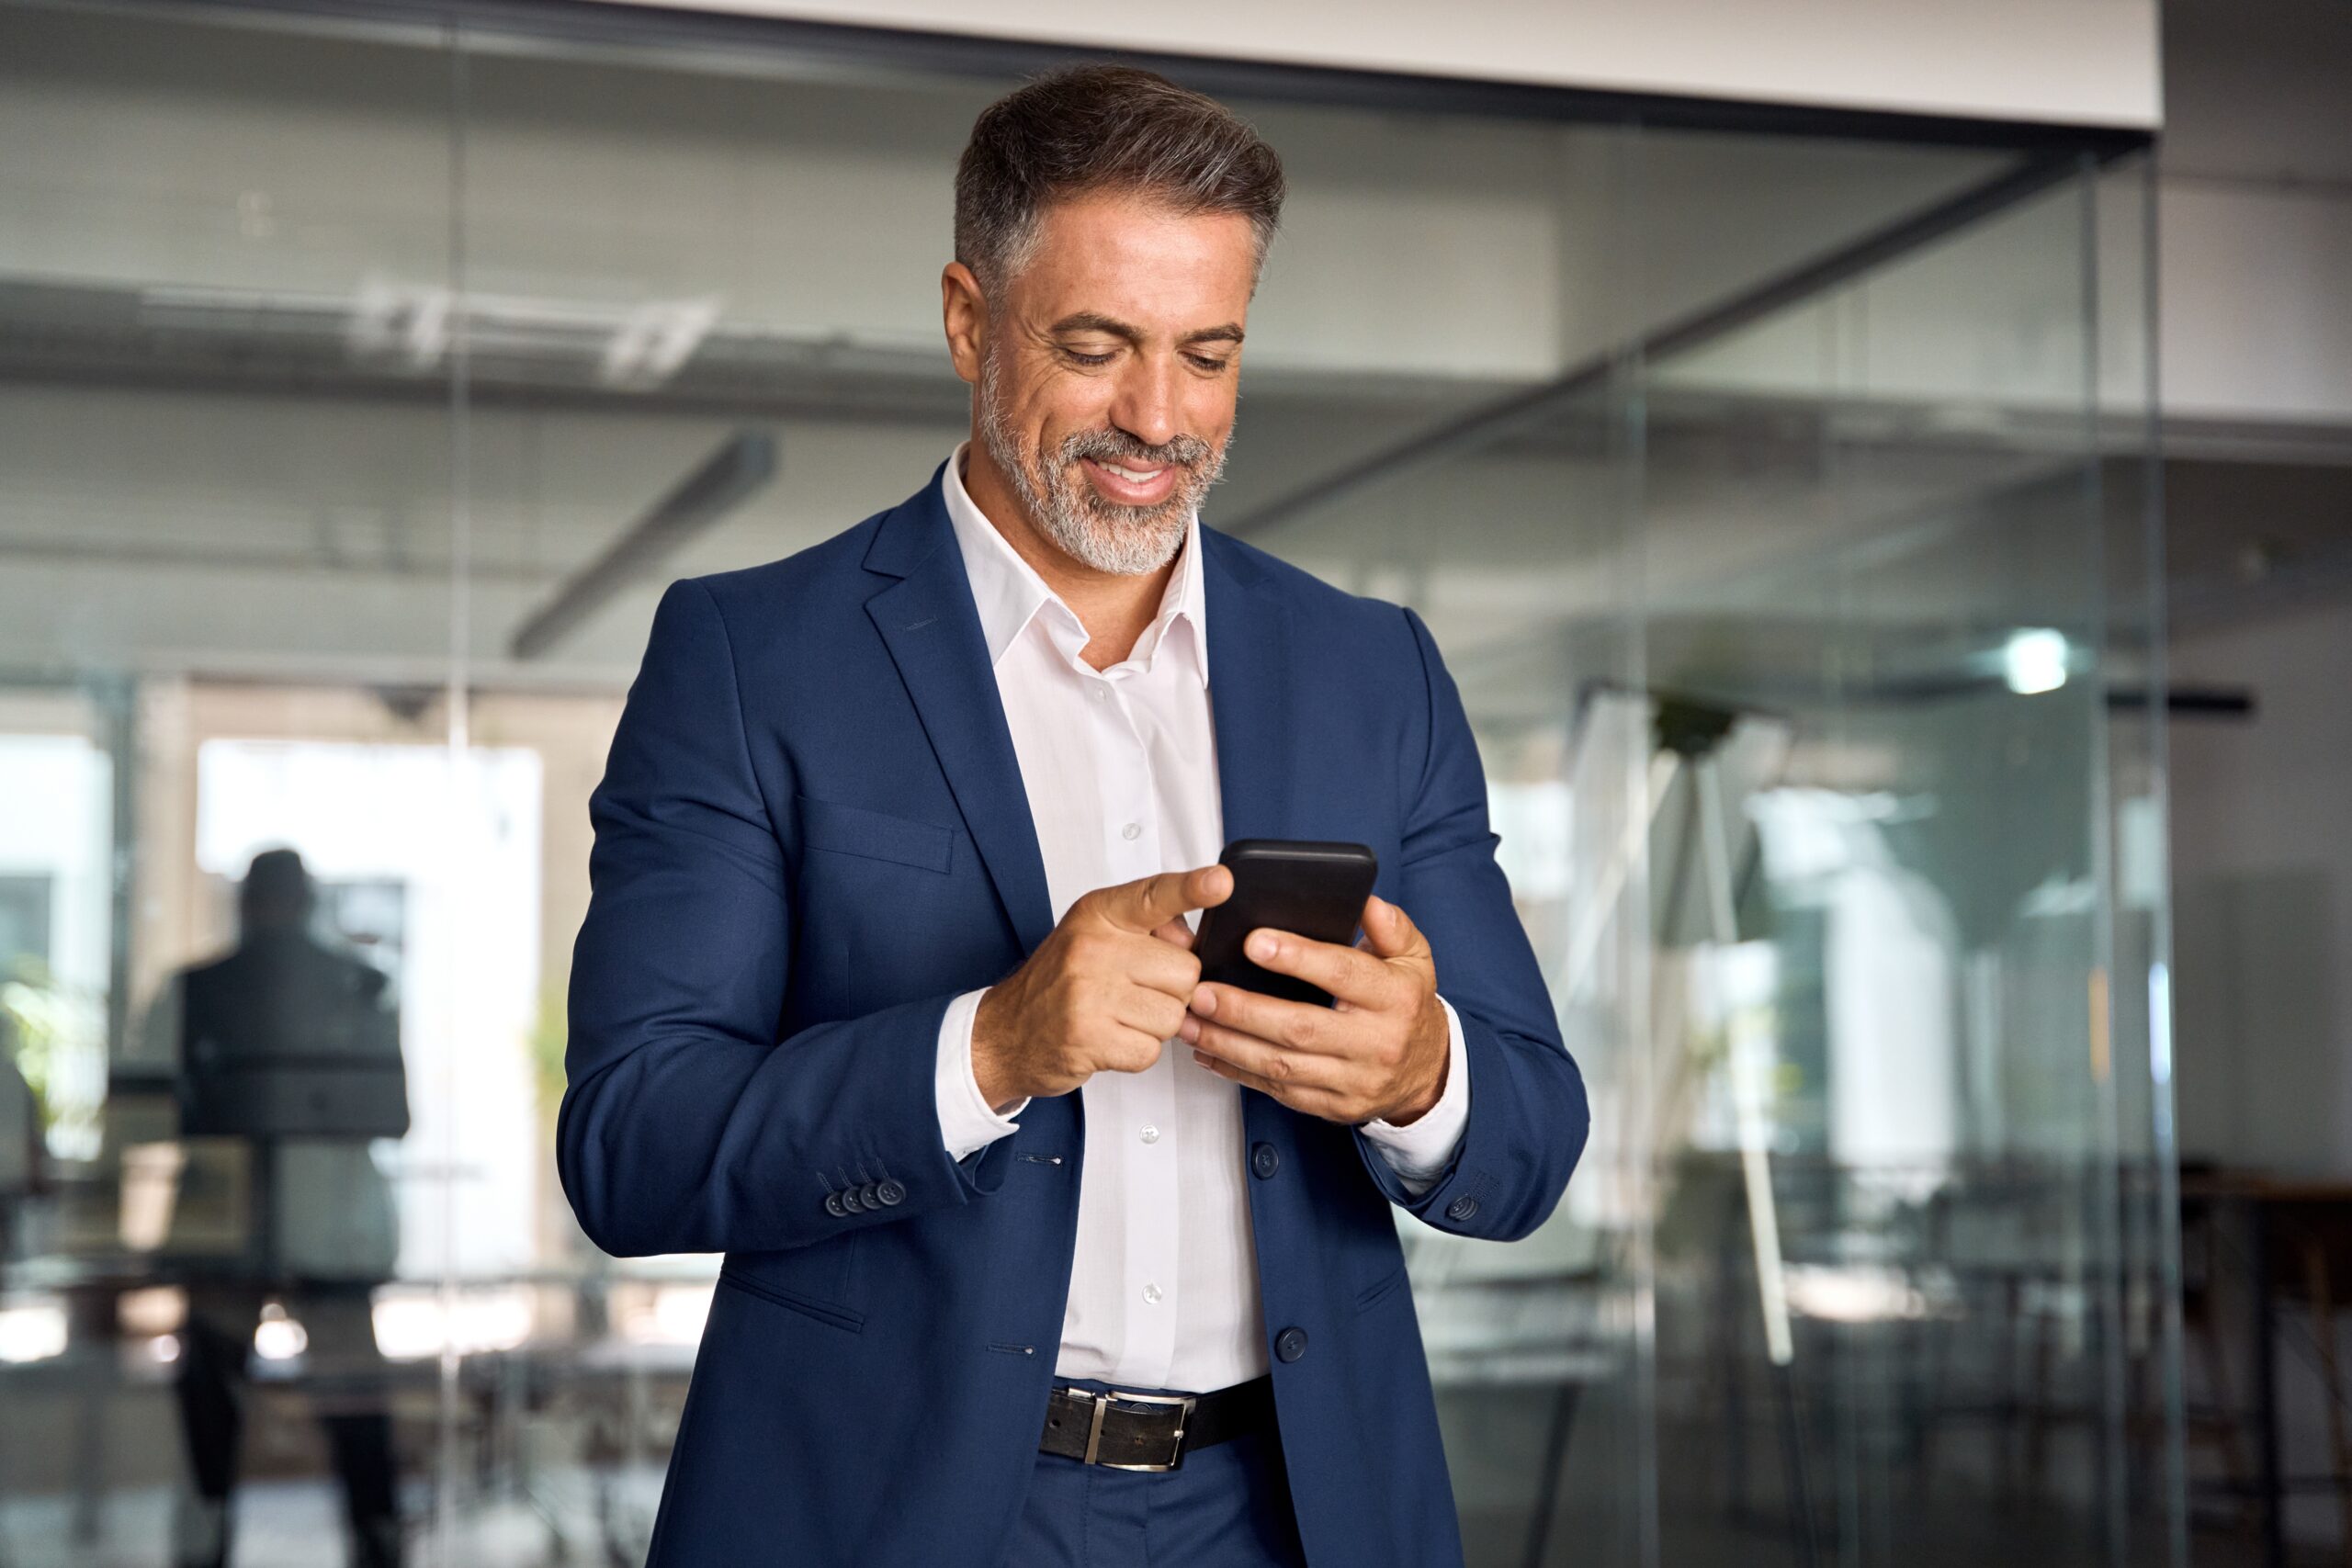 Smiling, Mature, Businessman, Holding a Smartphone In Office.